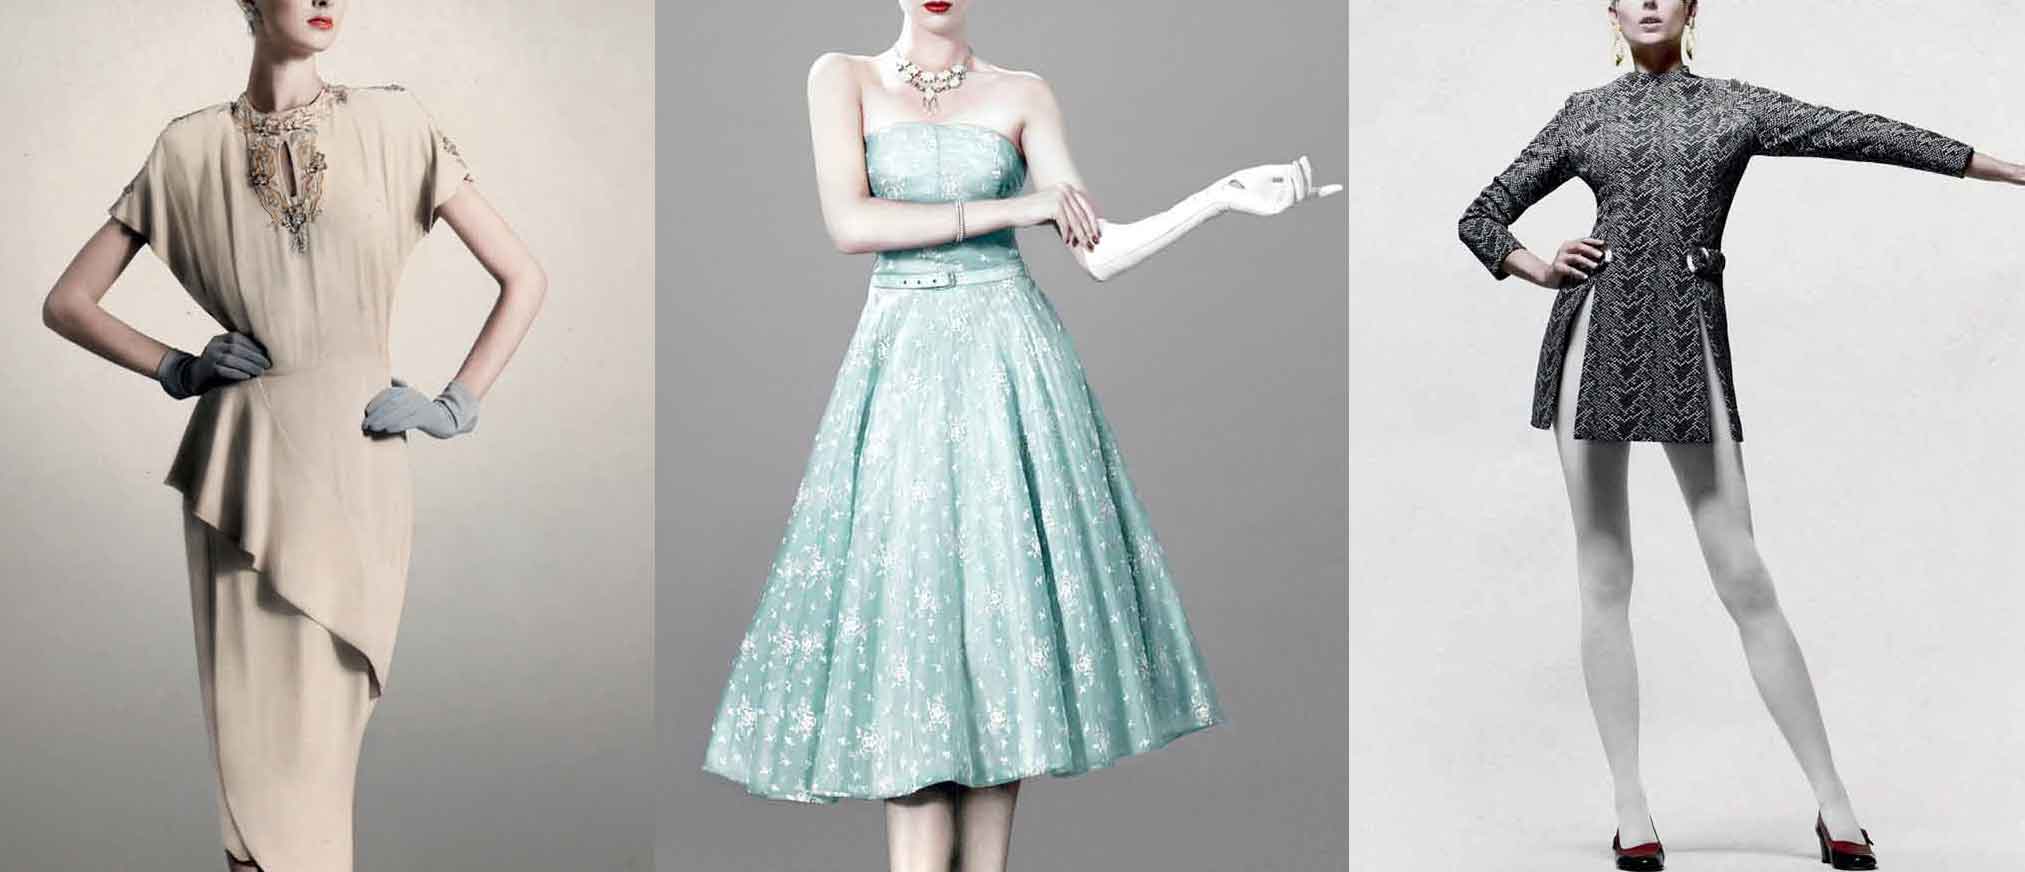 Beautiful Vintage Clothing fashion from 